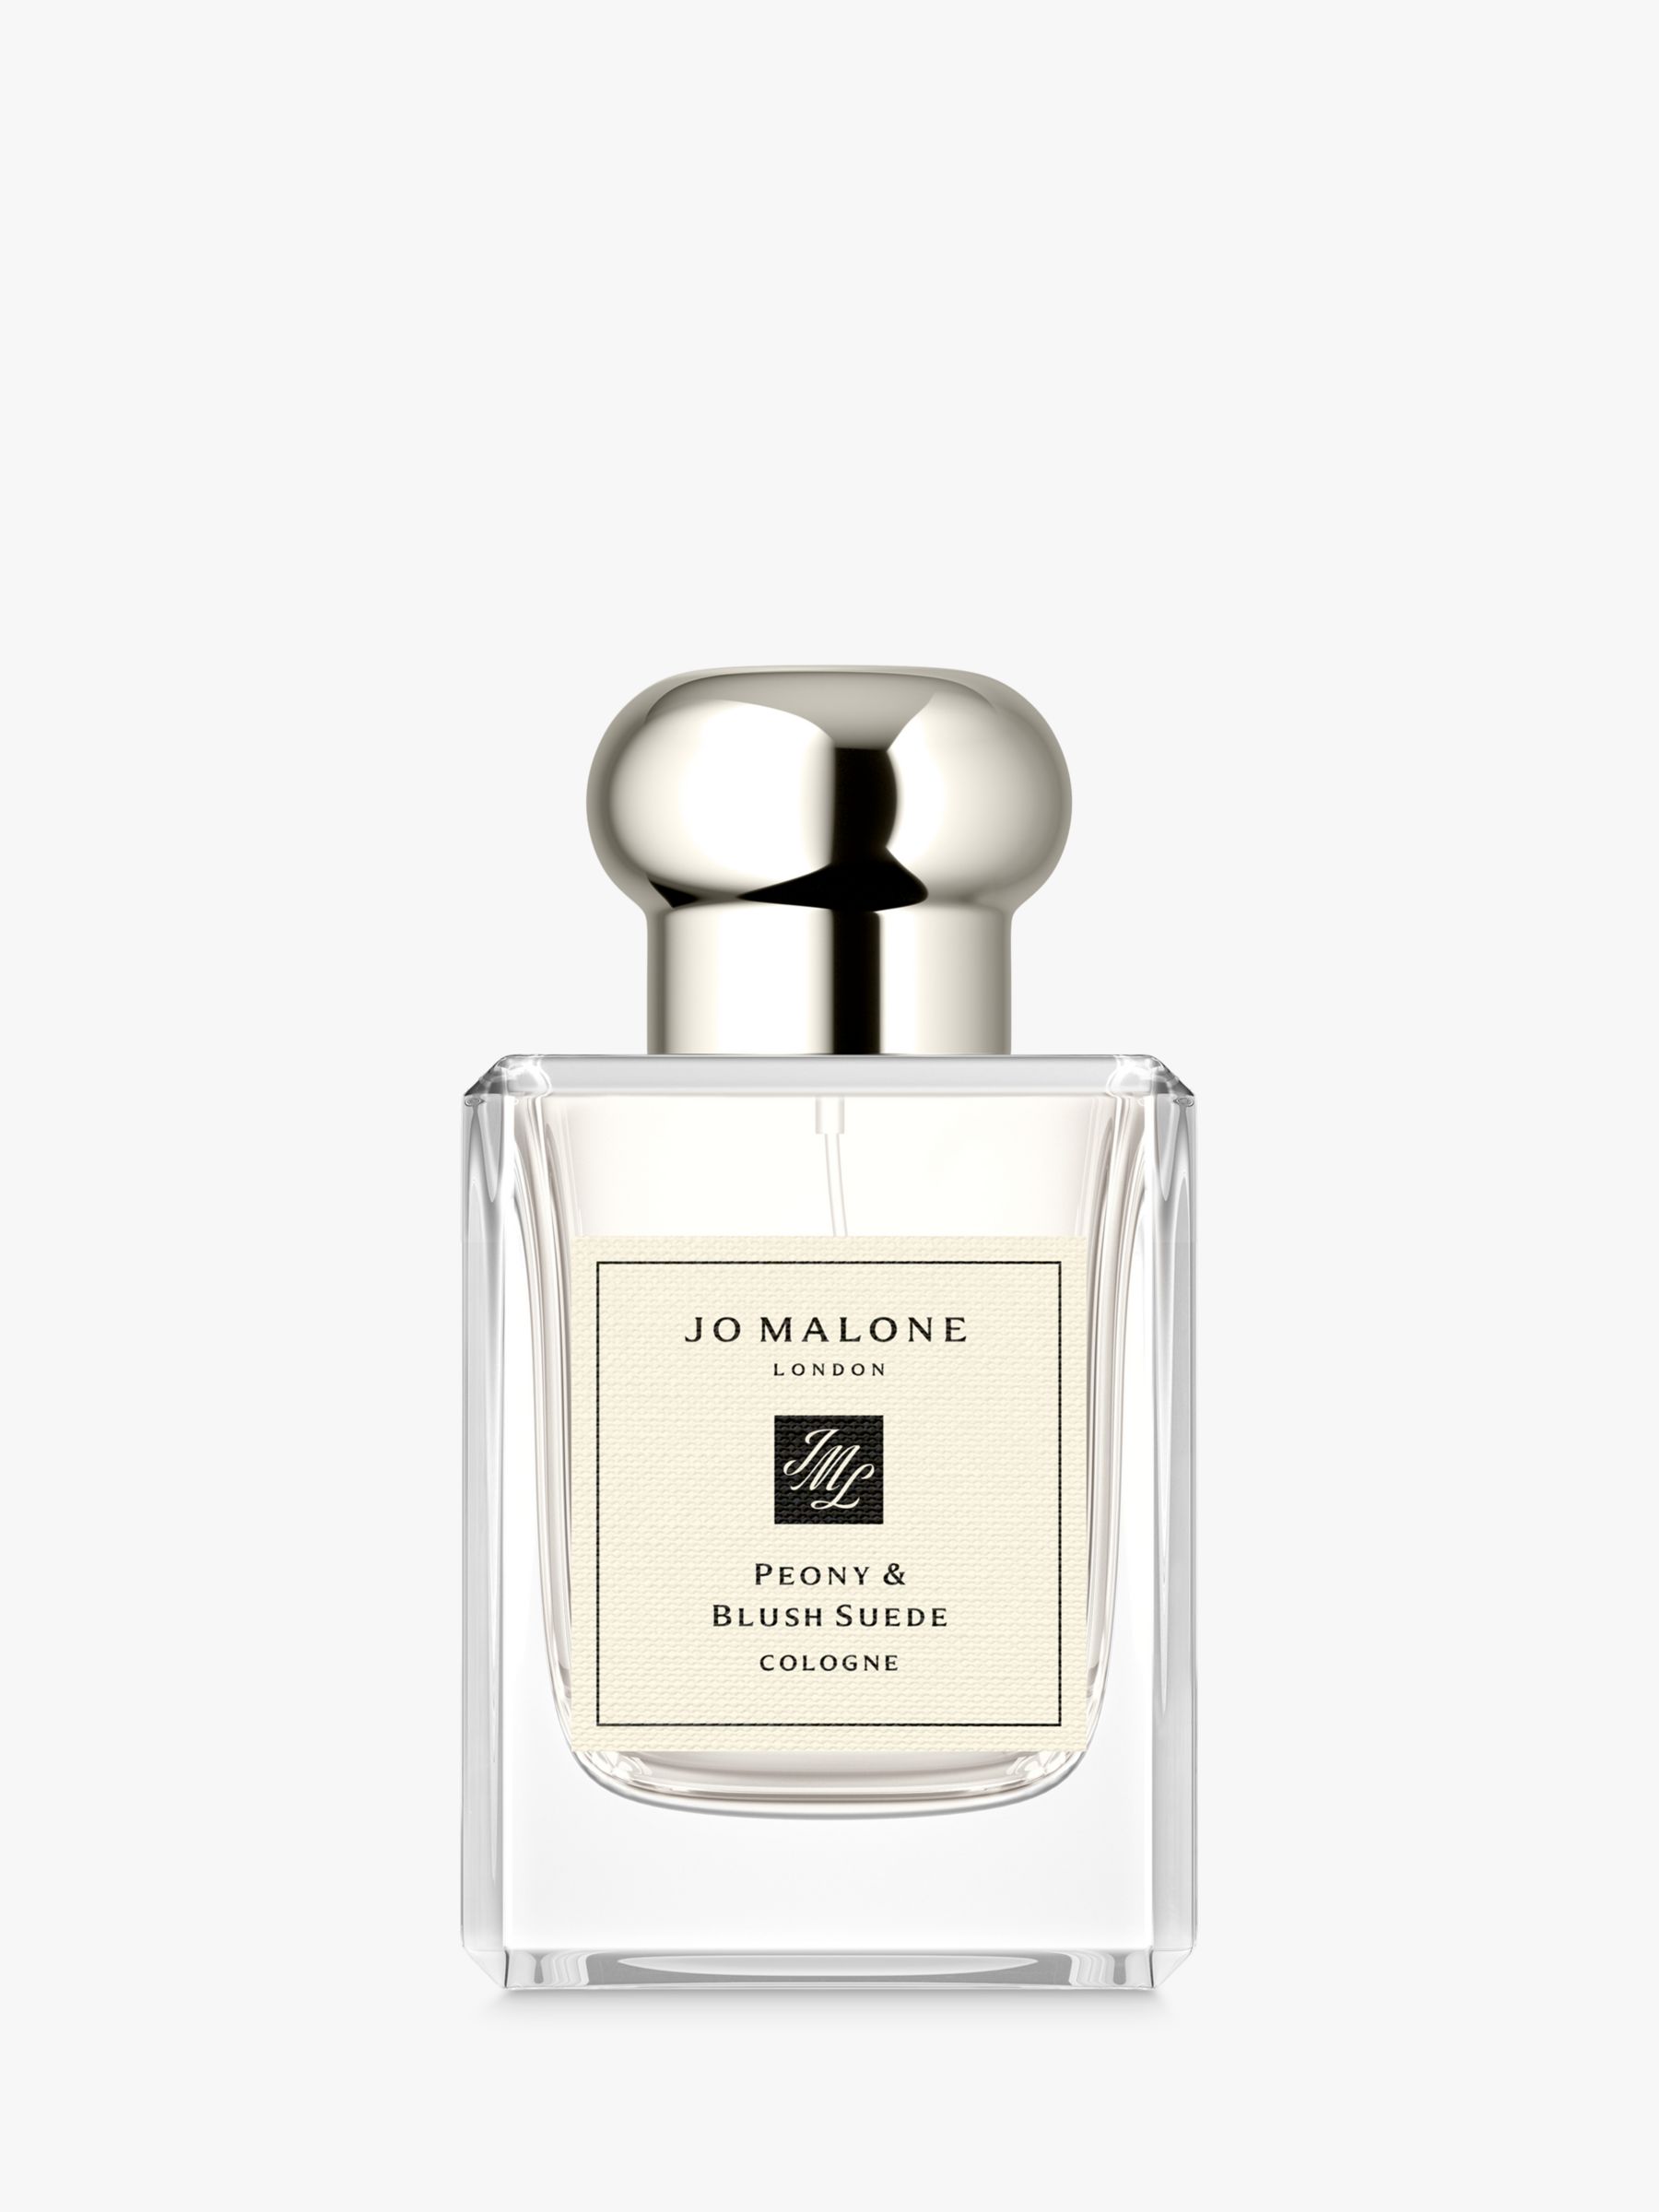 Jo Malone London Peony & Blush Suede Cologne, 50ml at John Lewis & Partners